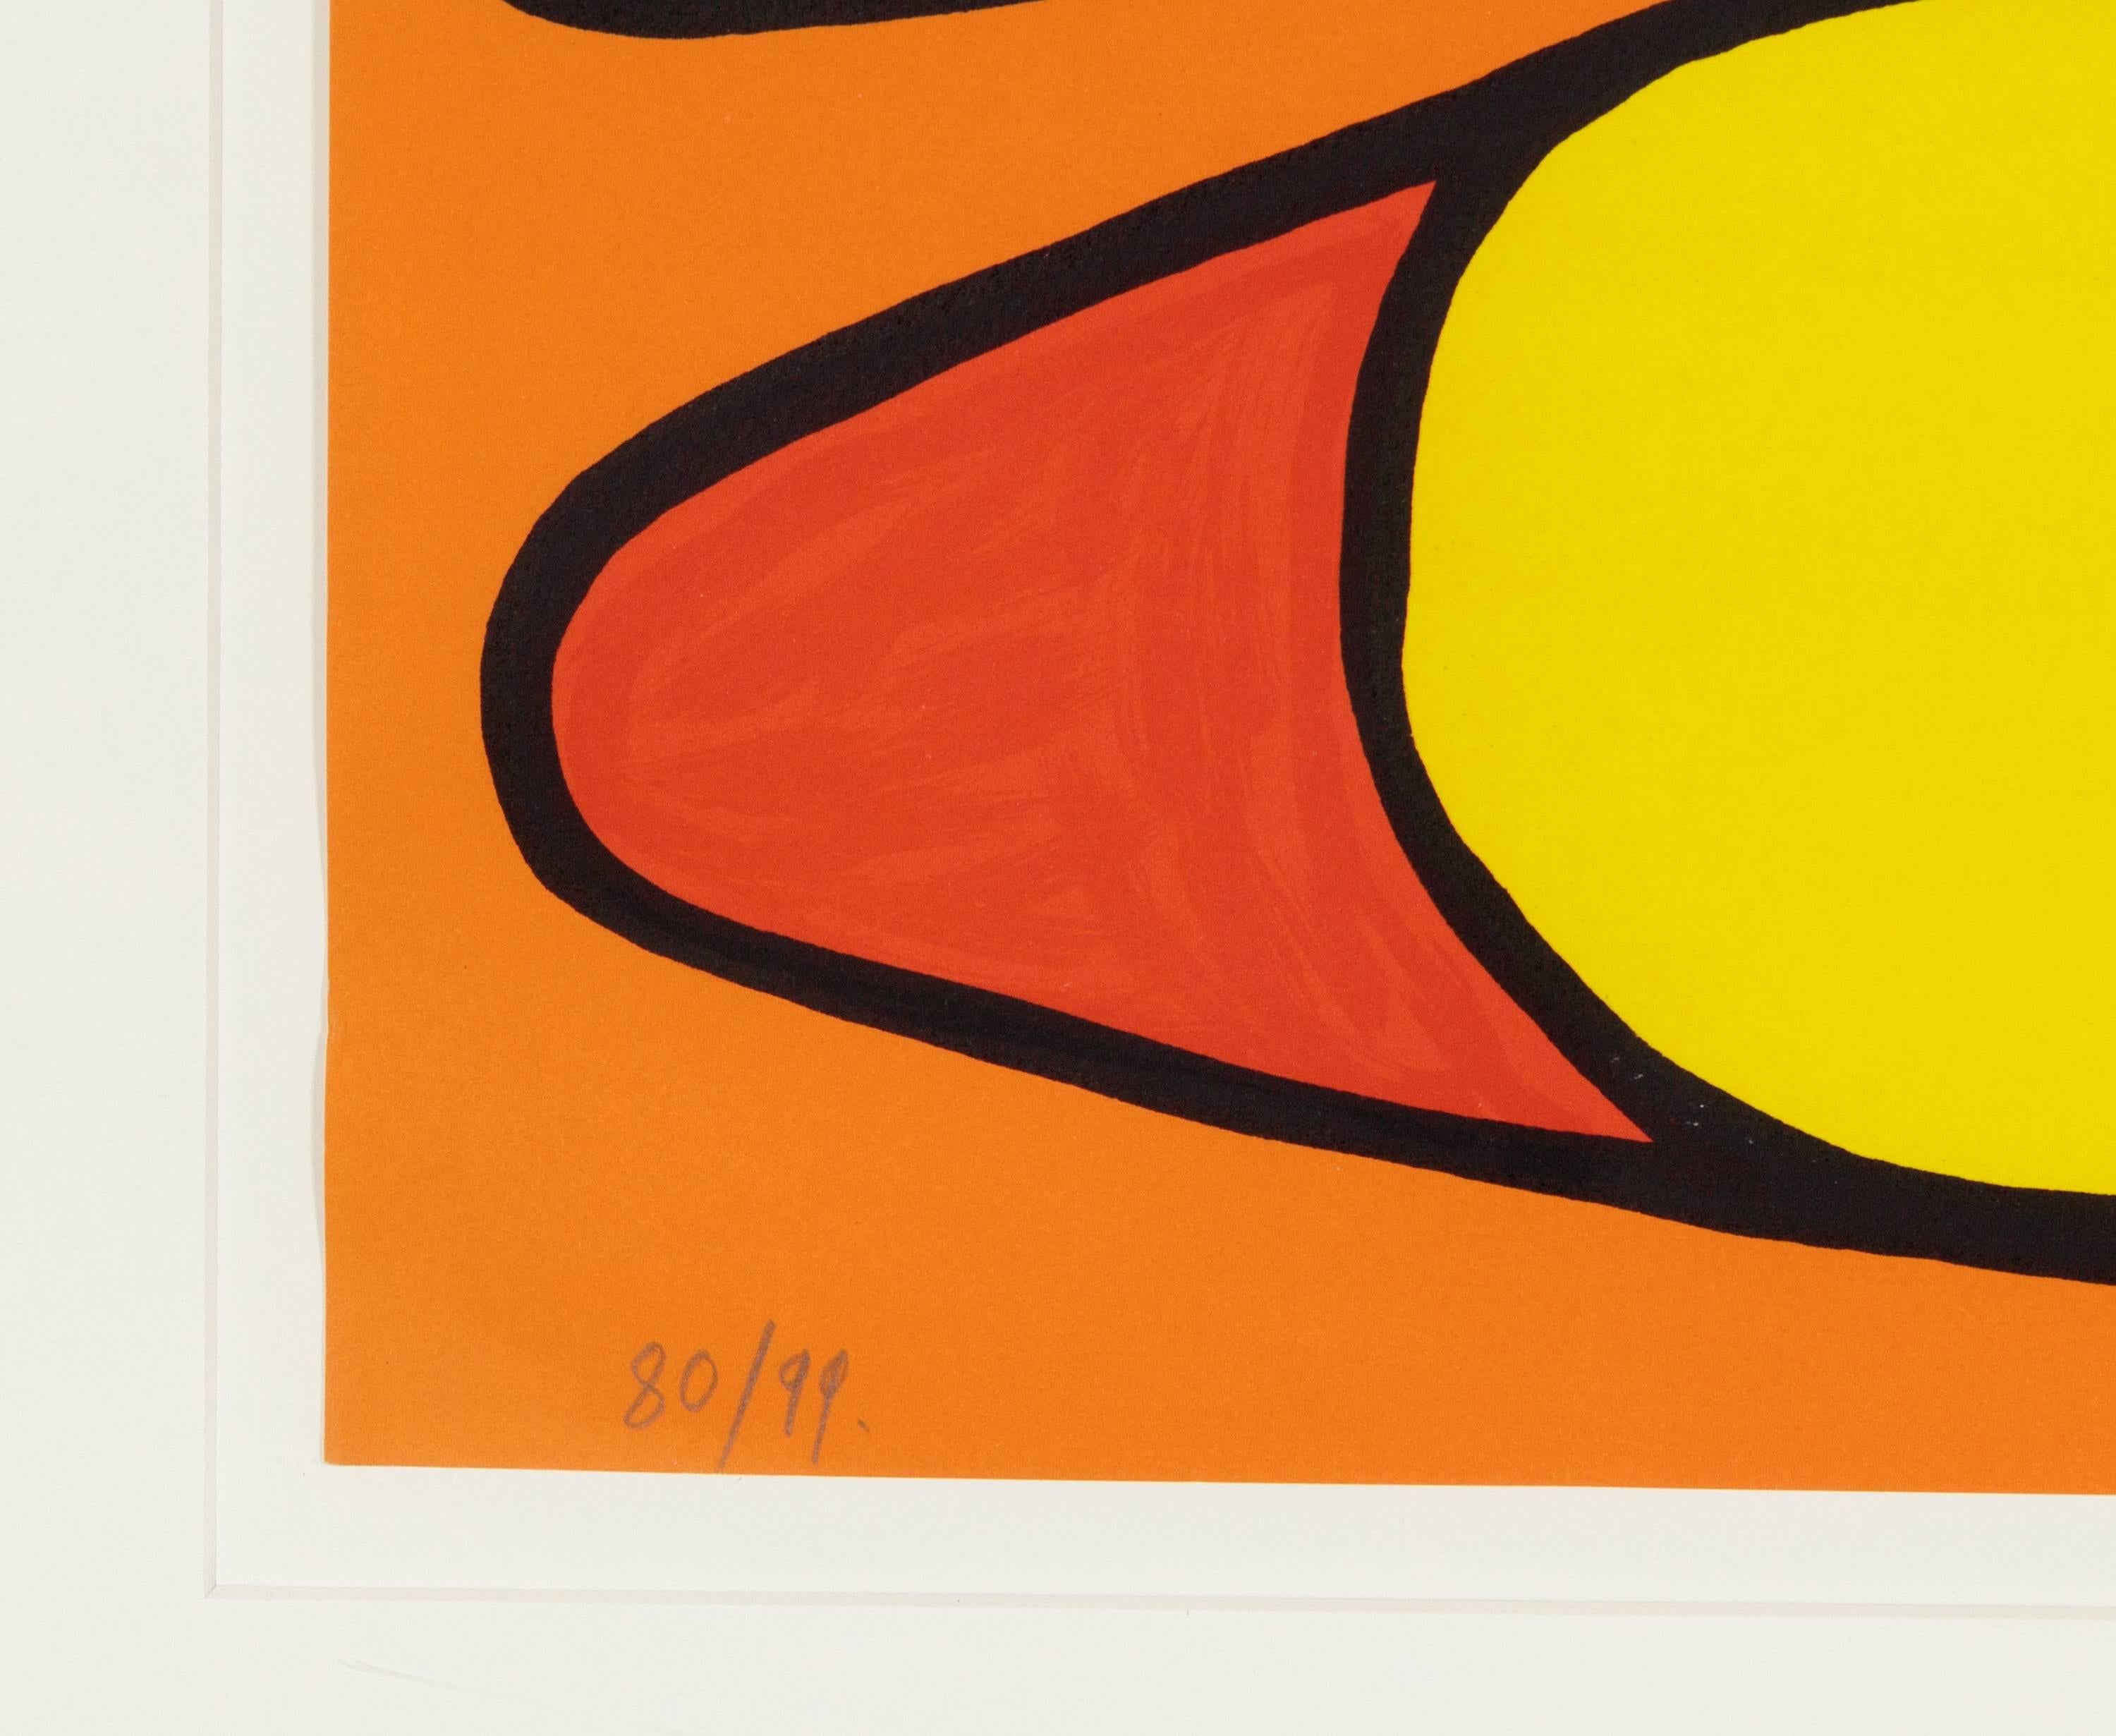 Composition with Circles and Tubes - Orange Abstract Print by Alexander Calder